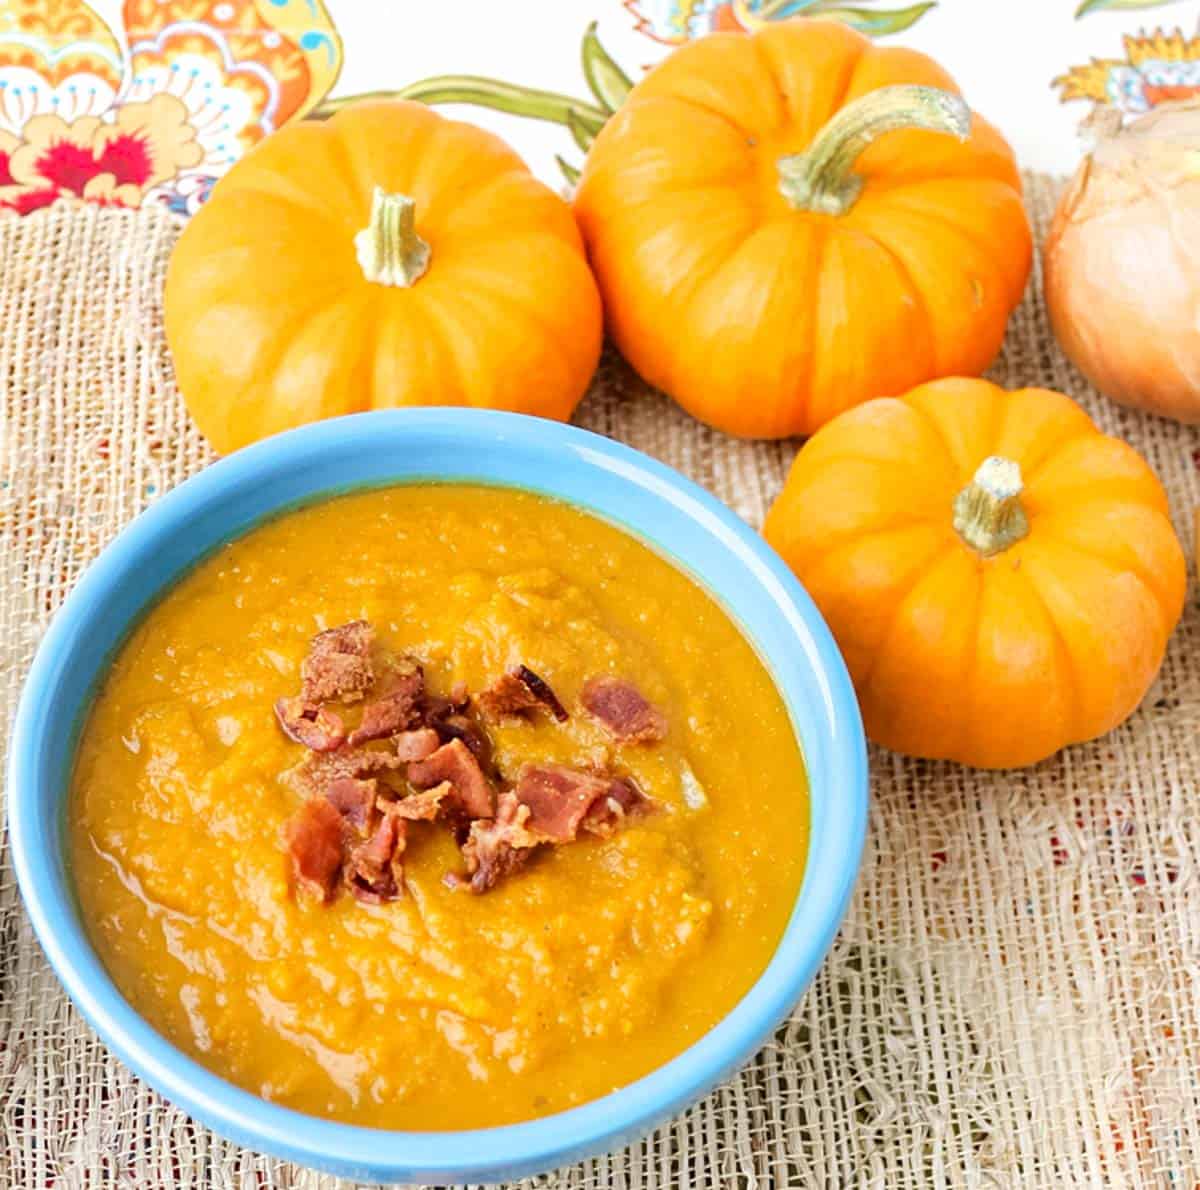 small decorative pumpkins on a patterned placemat with a blue bowl of soup topped with bacon